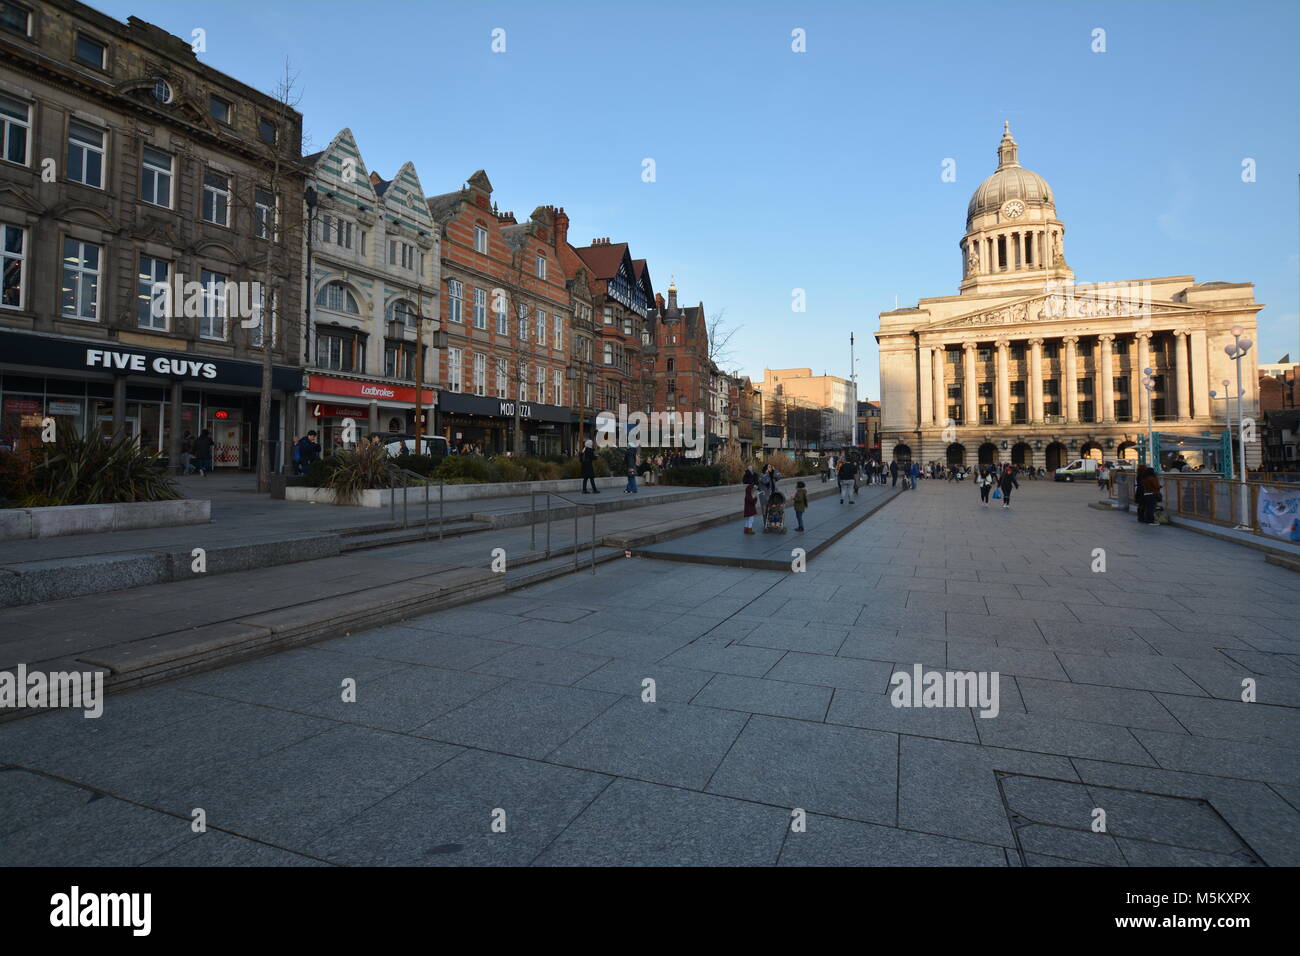 Nottingham, England - February 24, 2018: Tourists shopping at the Shops on Old Market Square with the Council House during spring. Stock Photo